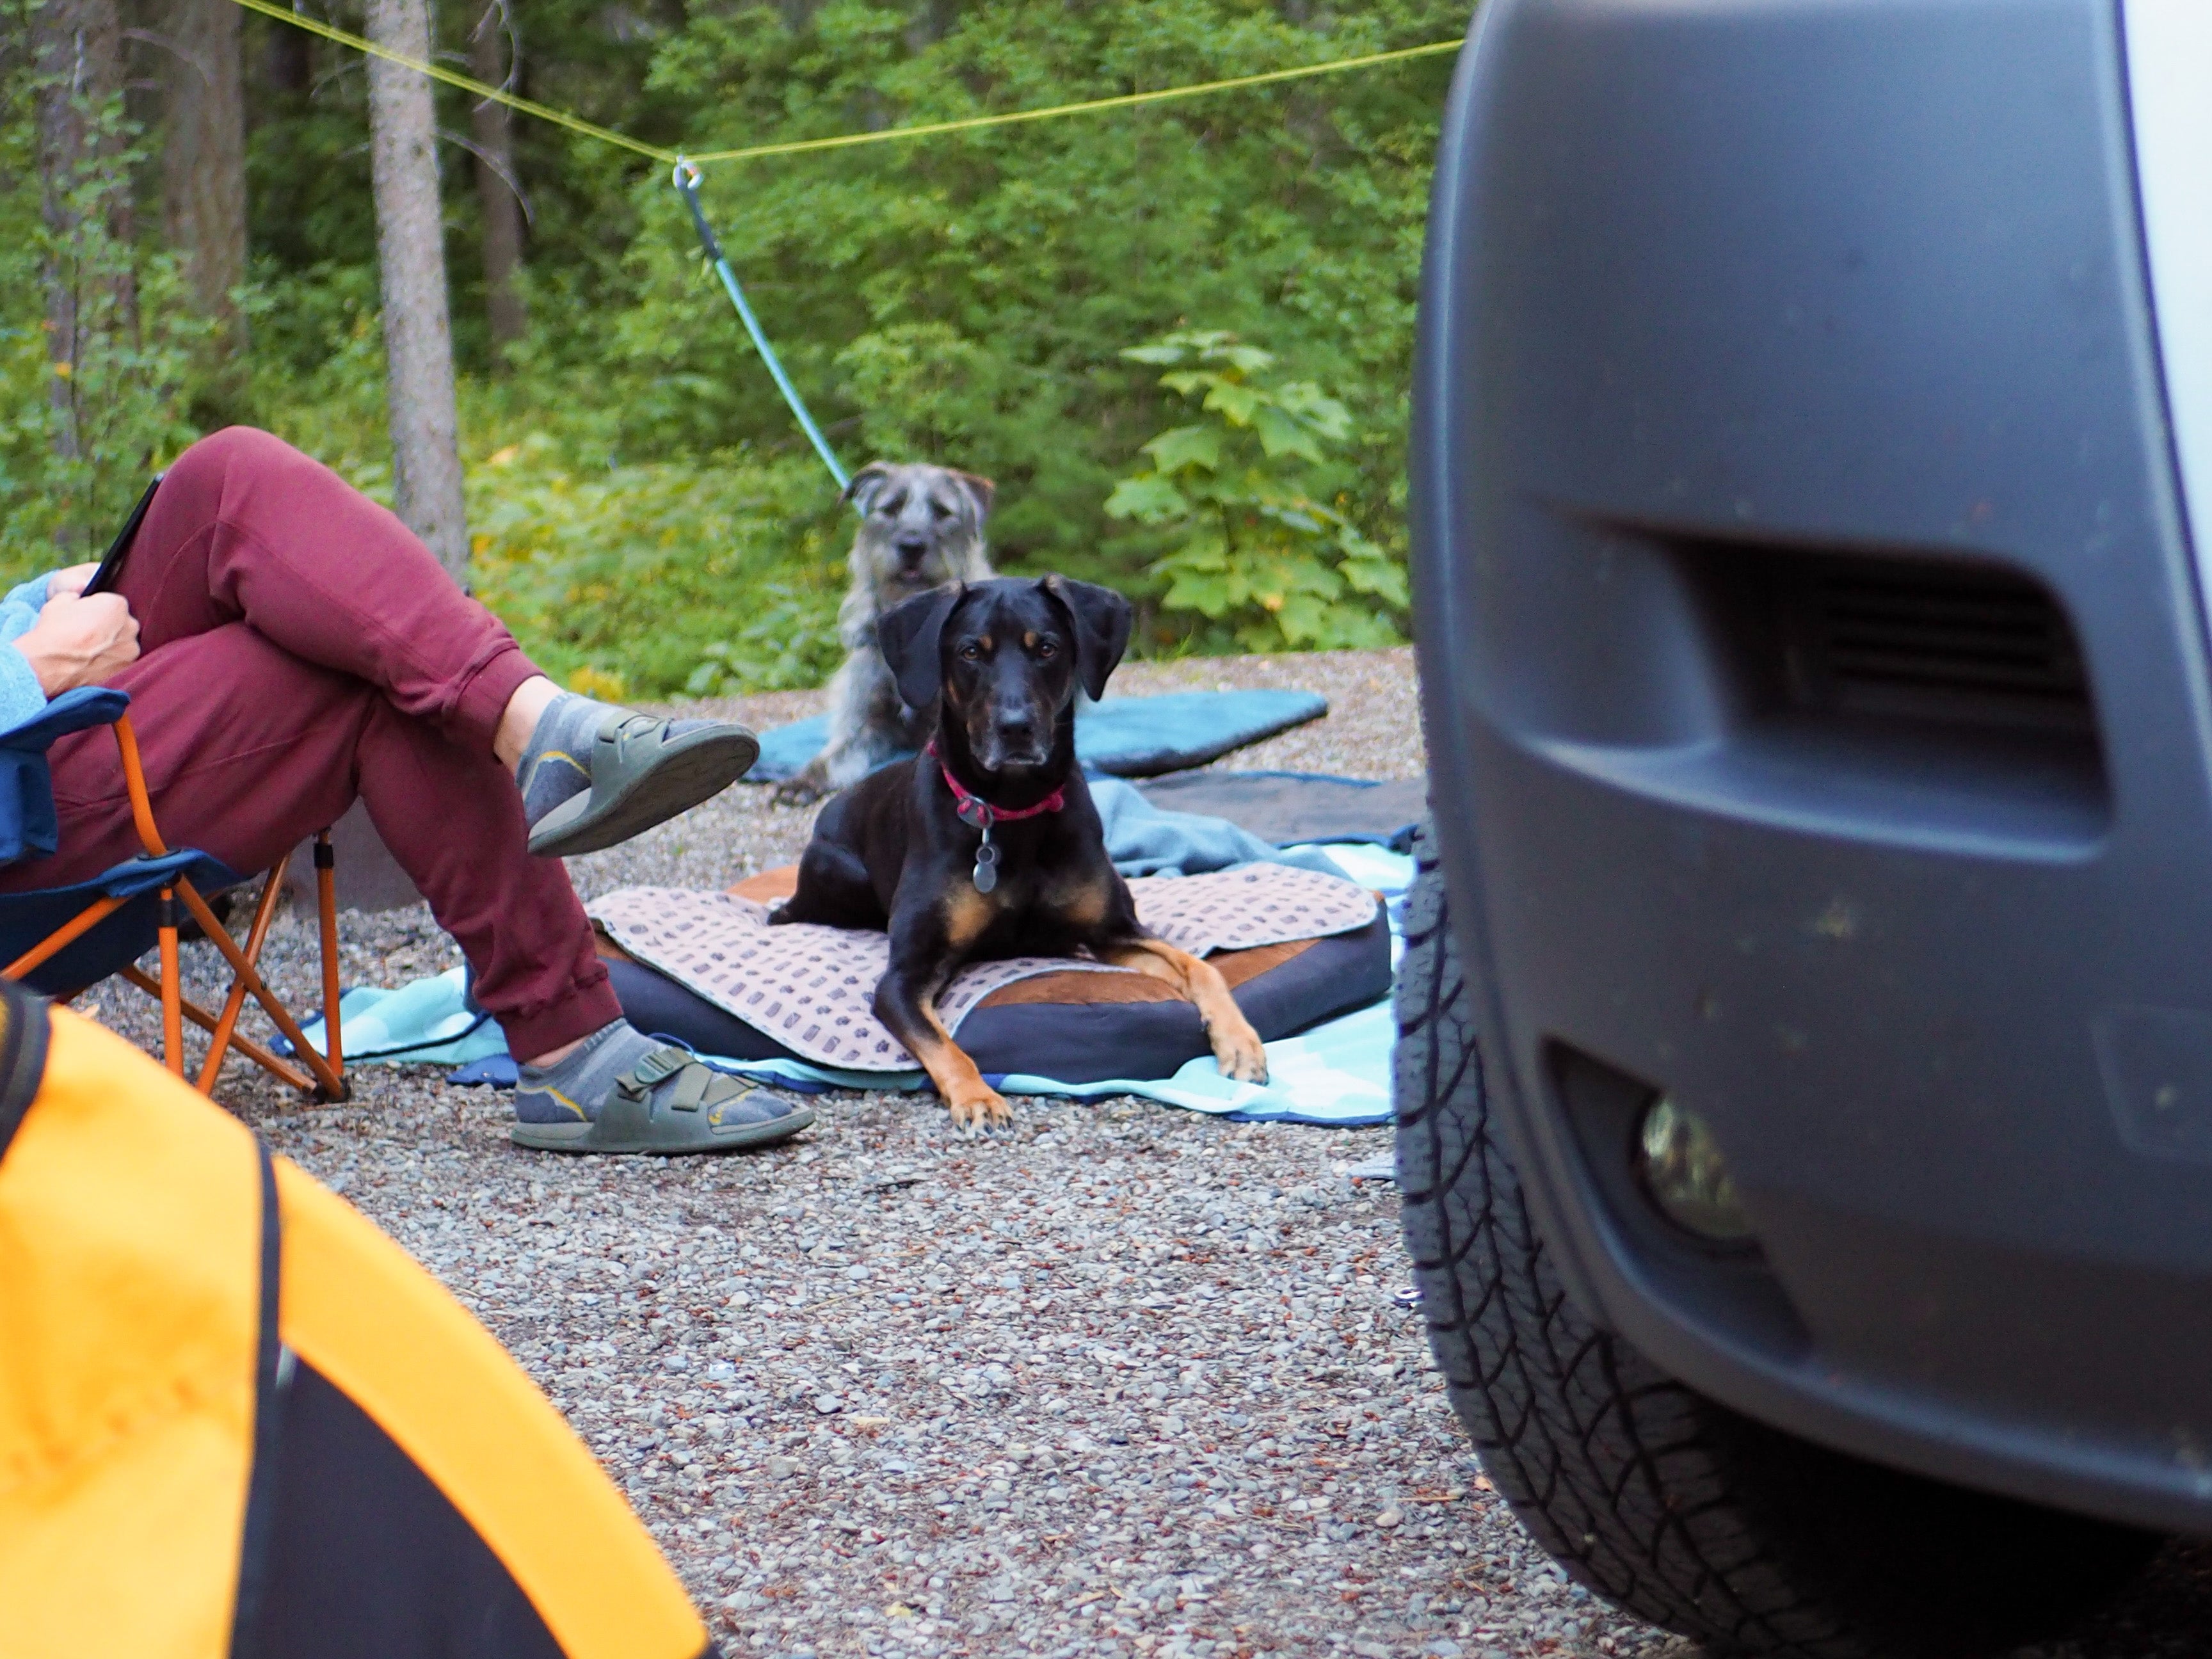 A dog hitched to the Ruffwear Knot-a-Hitch™ sits on an Urban Sprawl™ dog bed while camping.